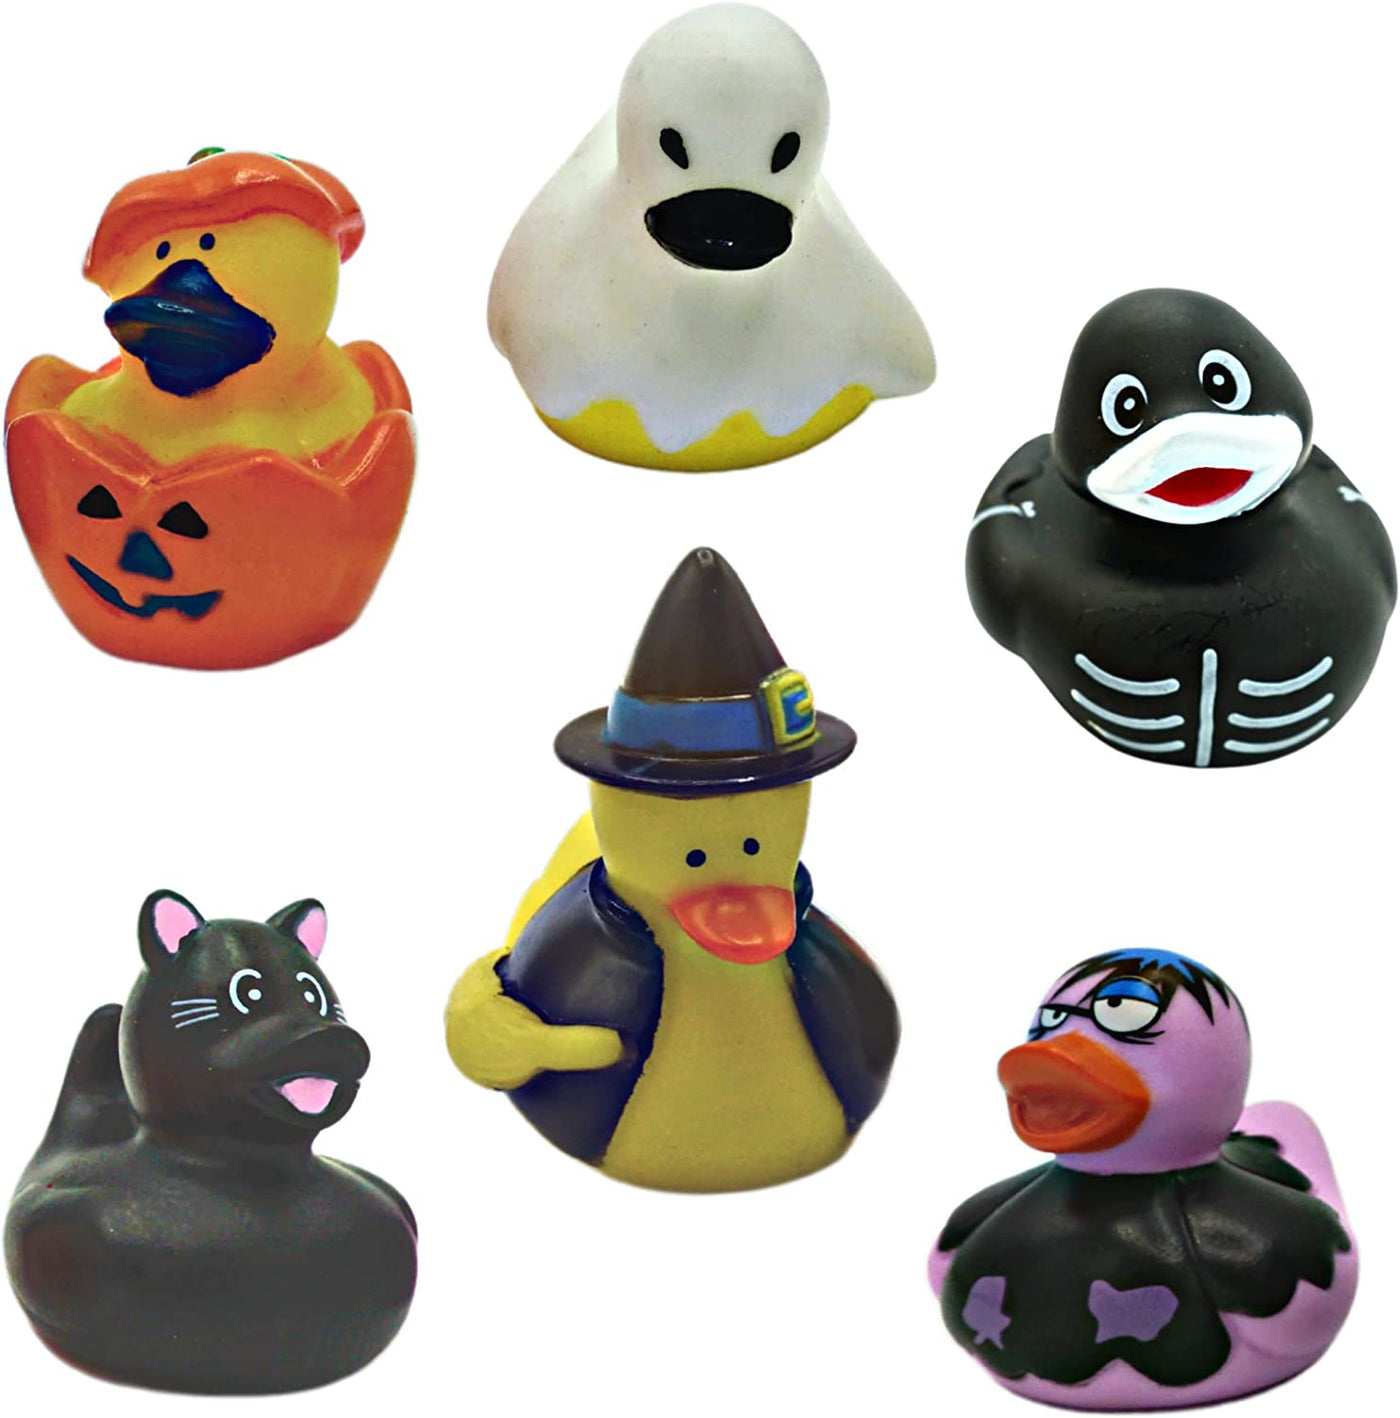 Halloween Rubber Ducks Bulk - 24 Pack, 6 Variety Themes, 2.5" for Halloween Party Favors for Kids, Goodie Bag Fillers, Jeep Ducking, Trick or Treat Toys for Toddlers by 4E's Novelty